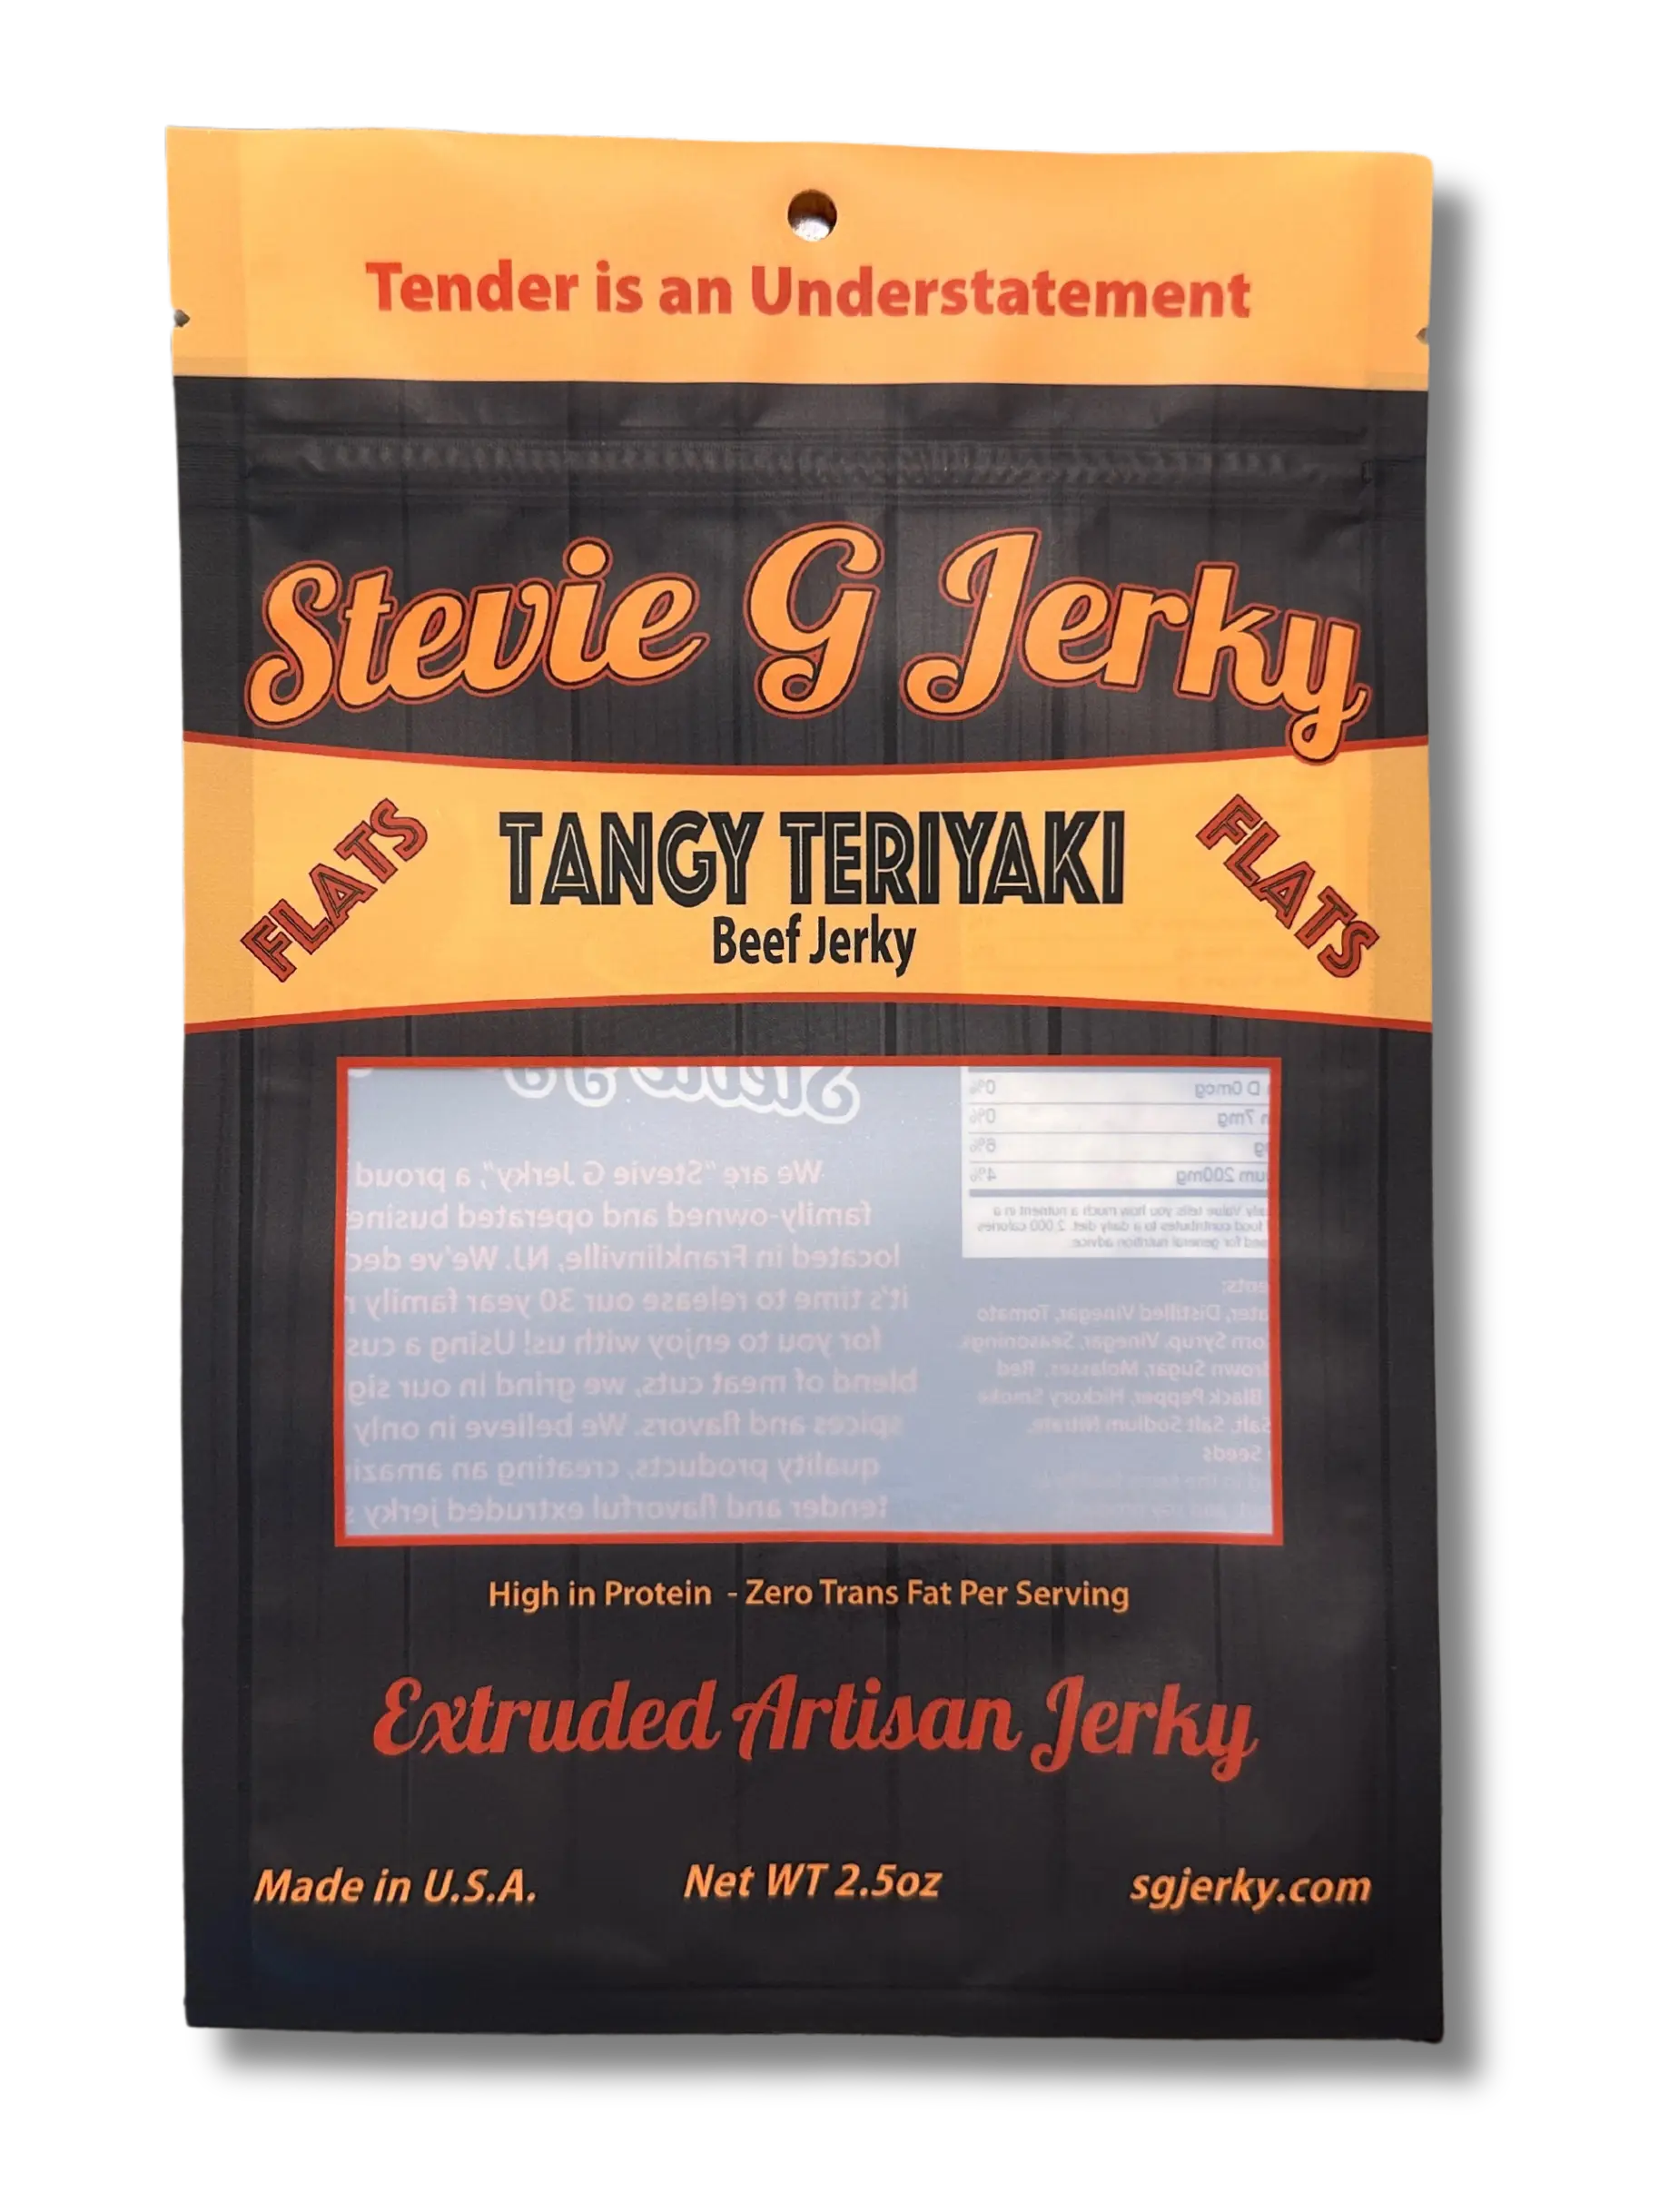 Detailed shot of The Tangy Teriyaki Beef Jerky Bundle by Steve G